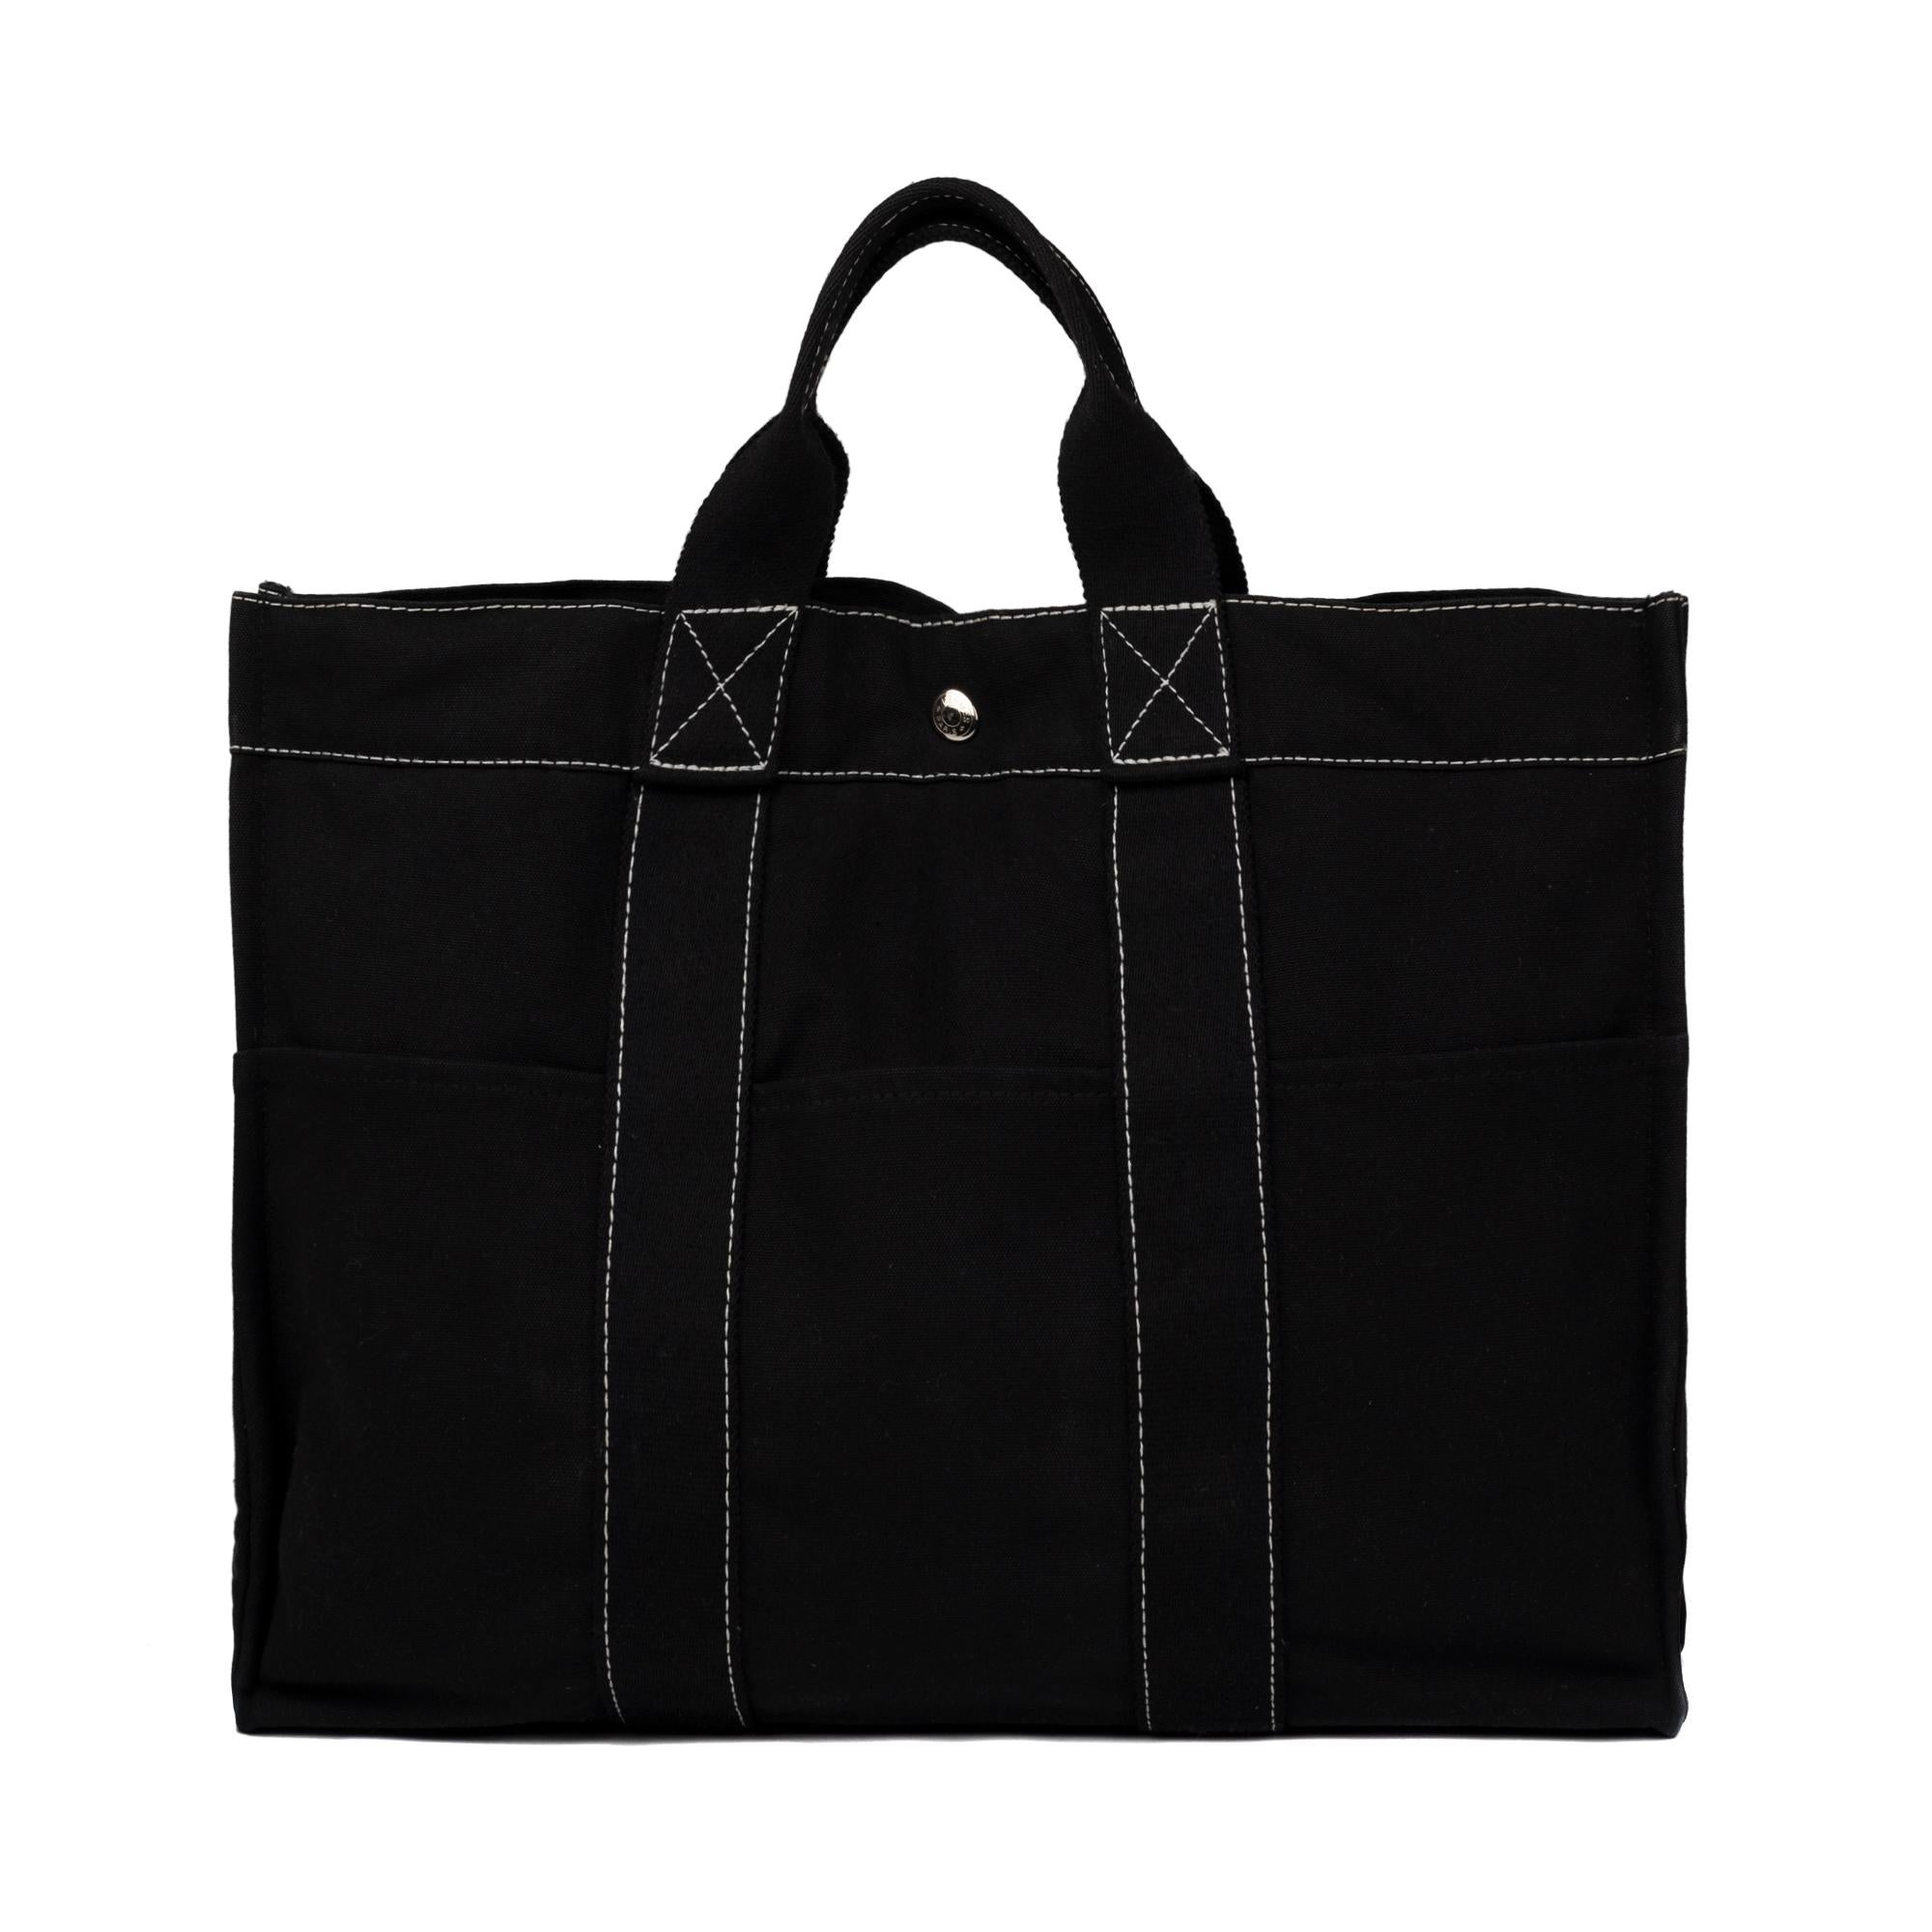 Brand: Hermes 
Model: Toto
Material: Canvas
Color: Black
Dimensions: 41.5x30.5x10 Cm
Condition: Very good
Packaging: Original box